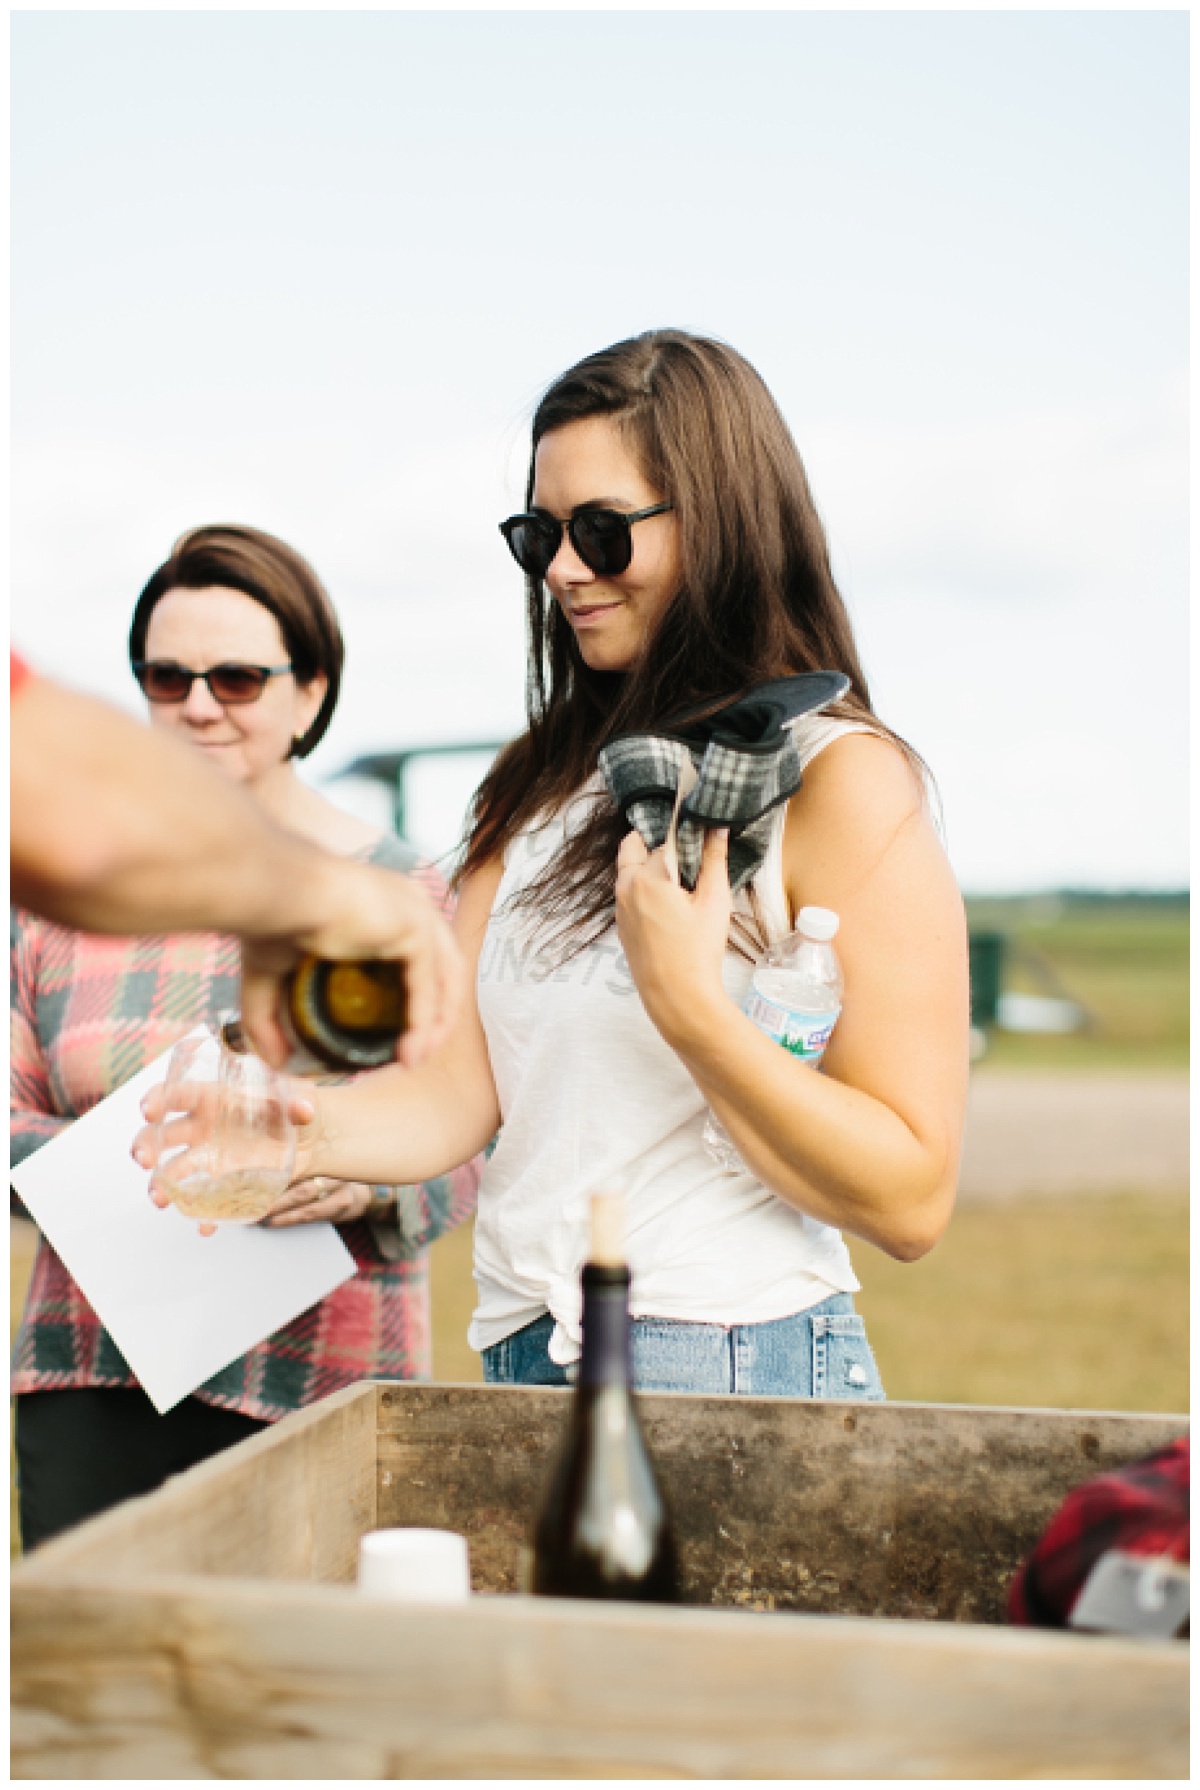 Alysa Rene Photography, Adventure North Retreat, Manitowish Waters, Alderwood Resort, The Lake Effect Co, Northerly Collective, Northern Wisconsin, Northwoods, Women, cranberry bog, wine tasting, cheese